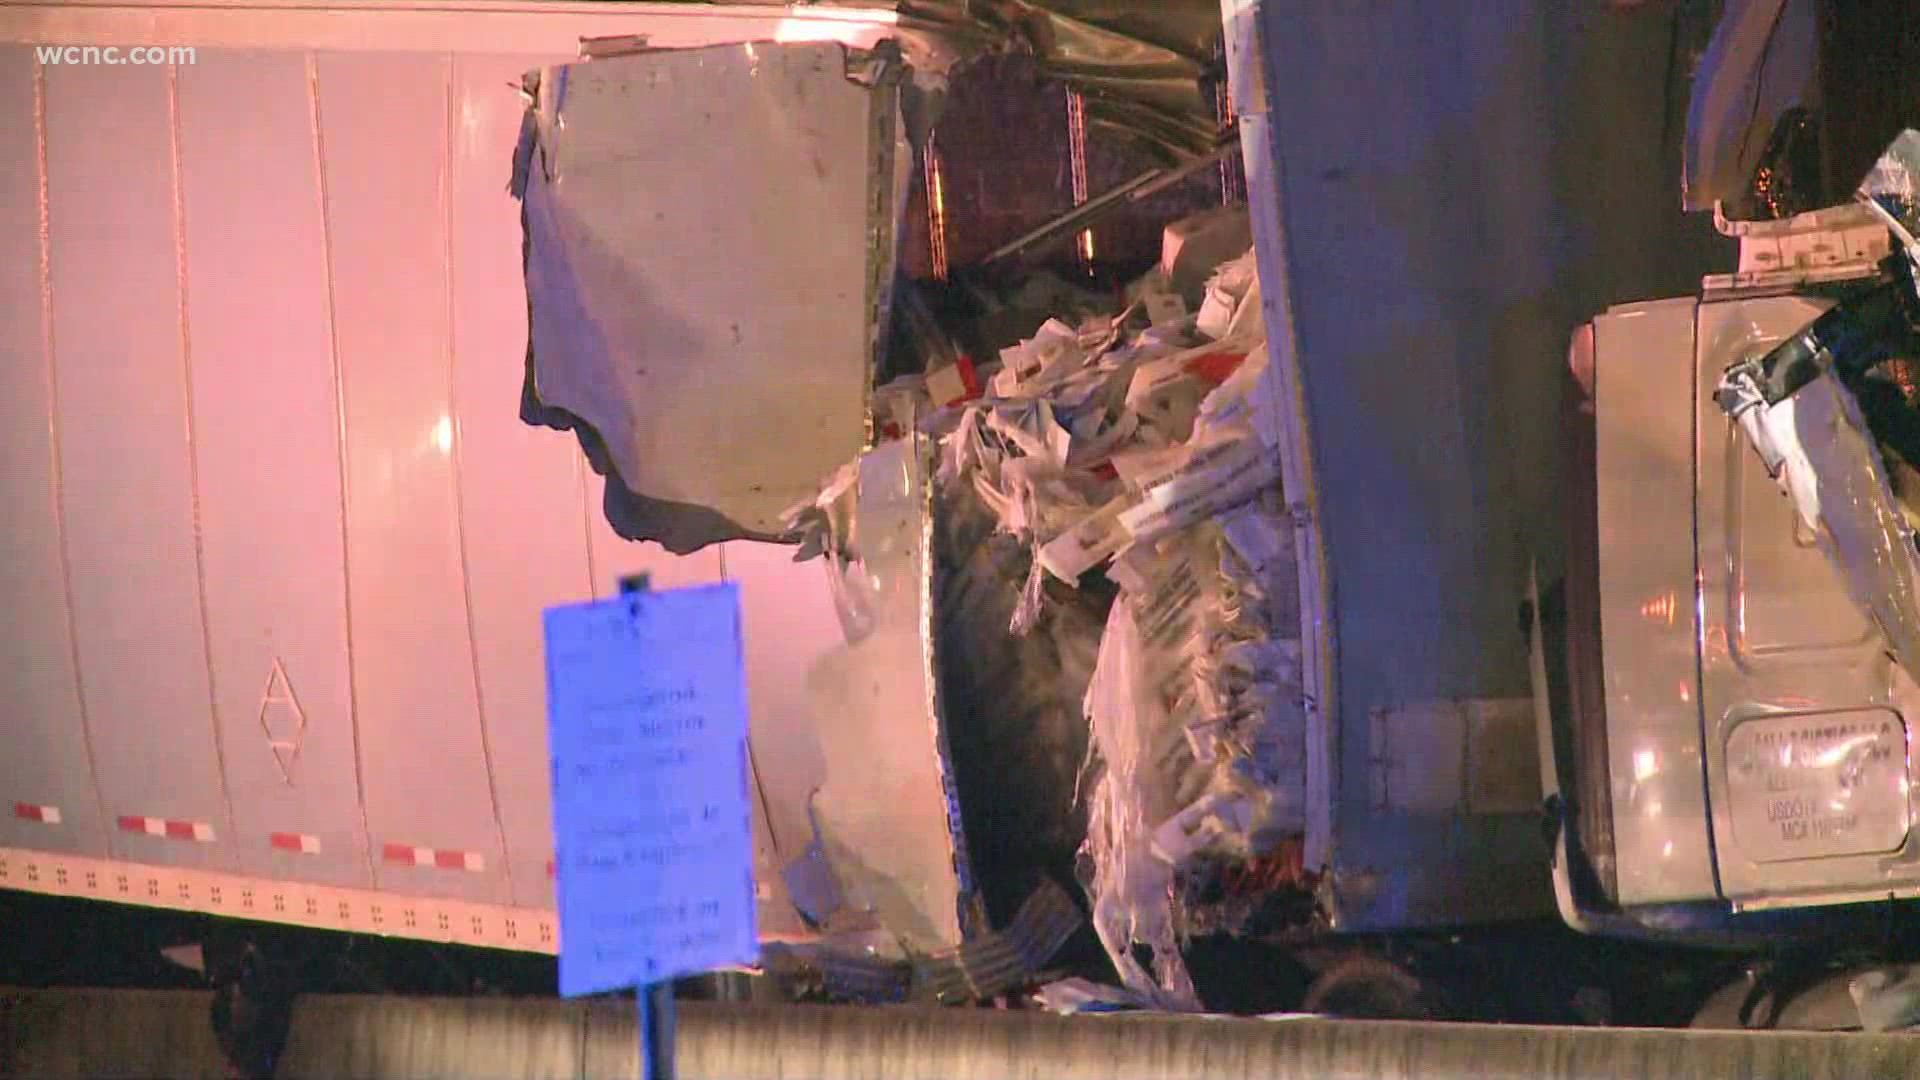 Mail truck involved in accident on I-85